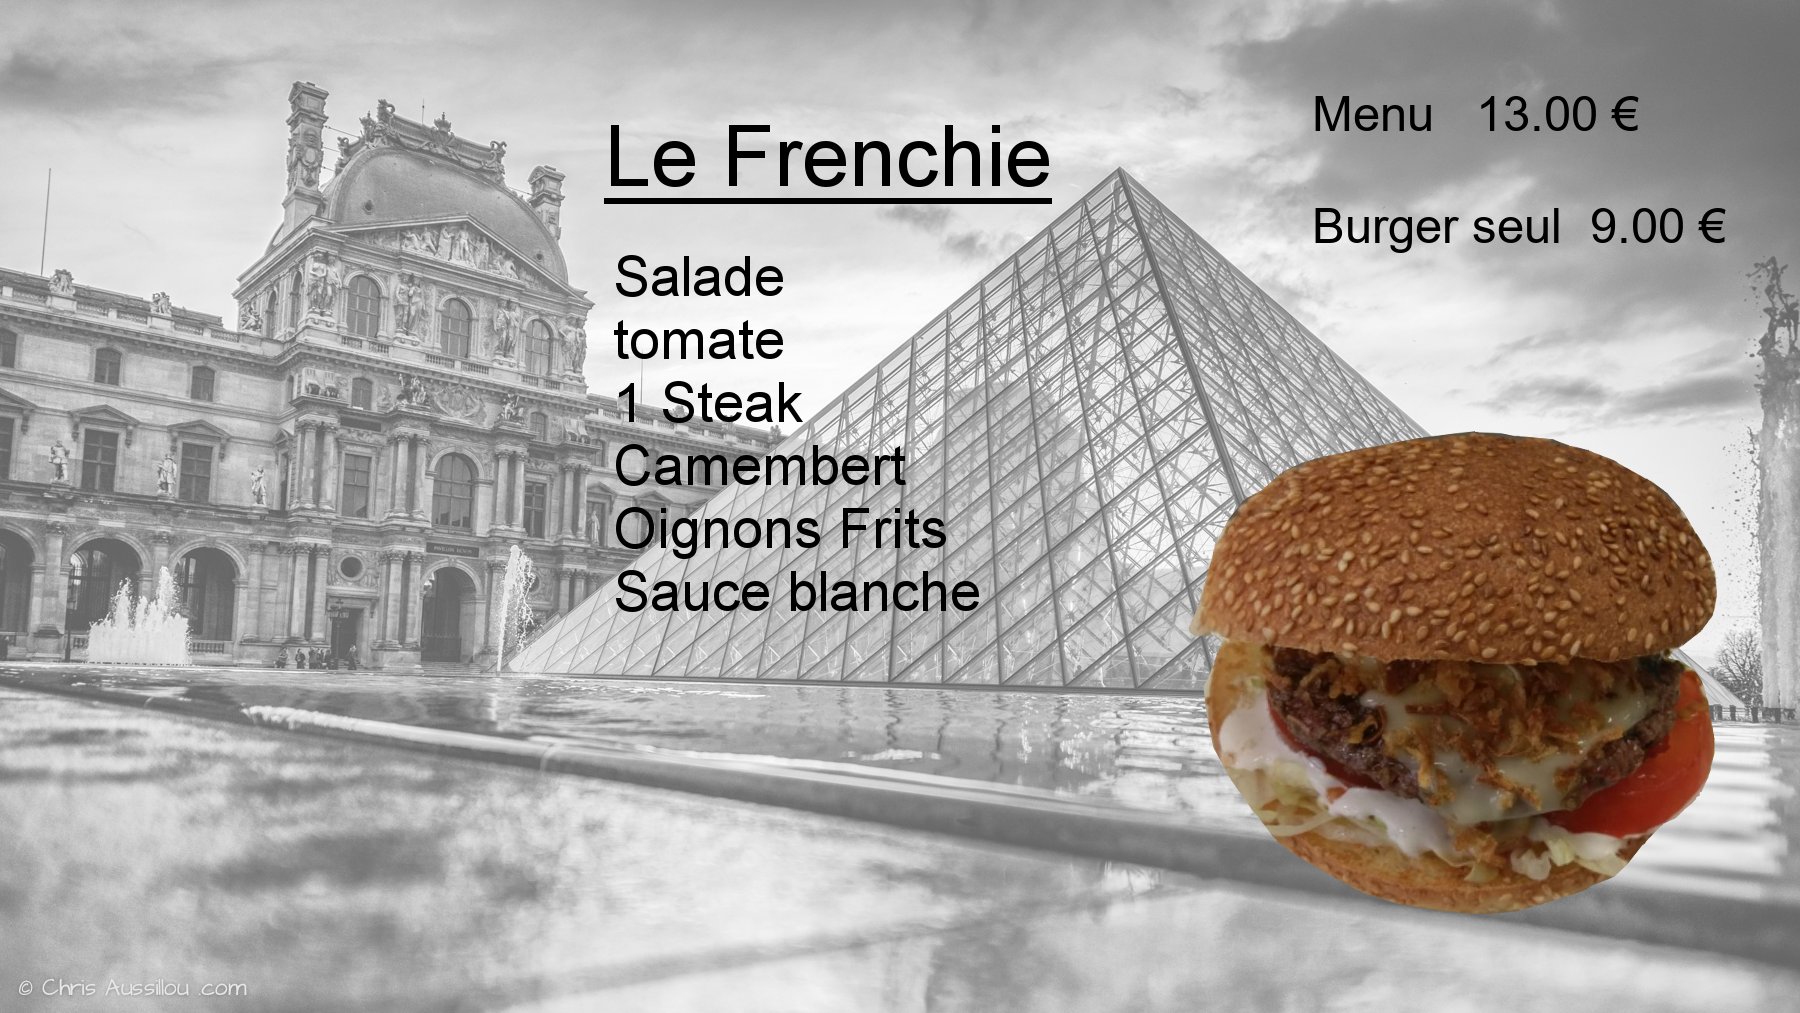 Le frenchie2